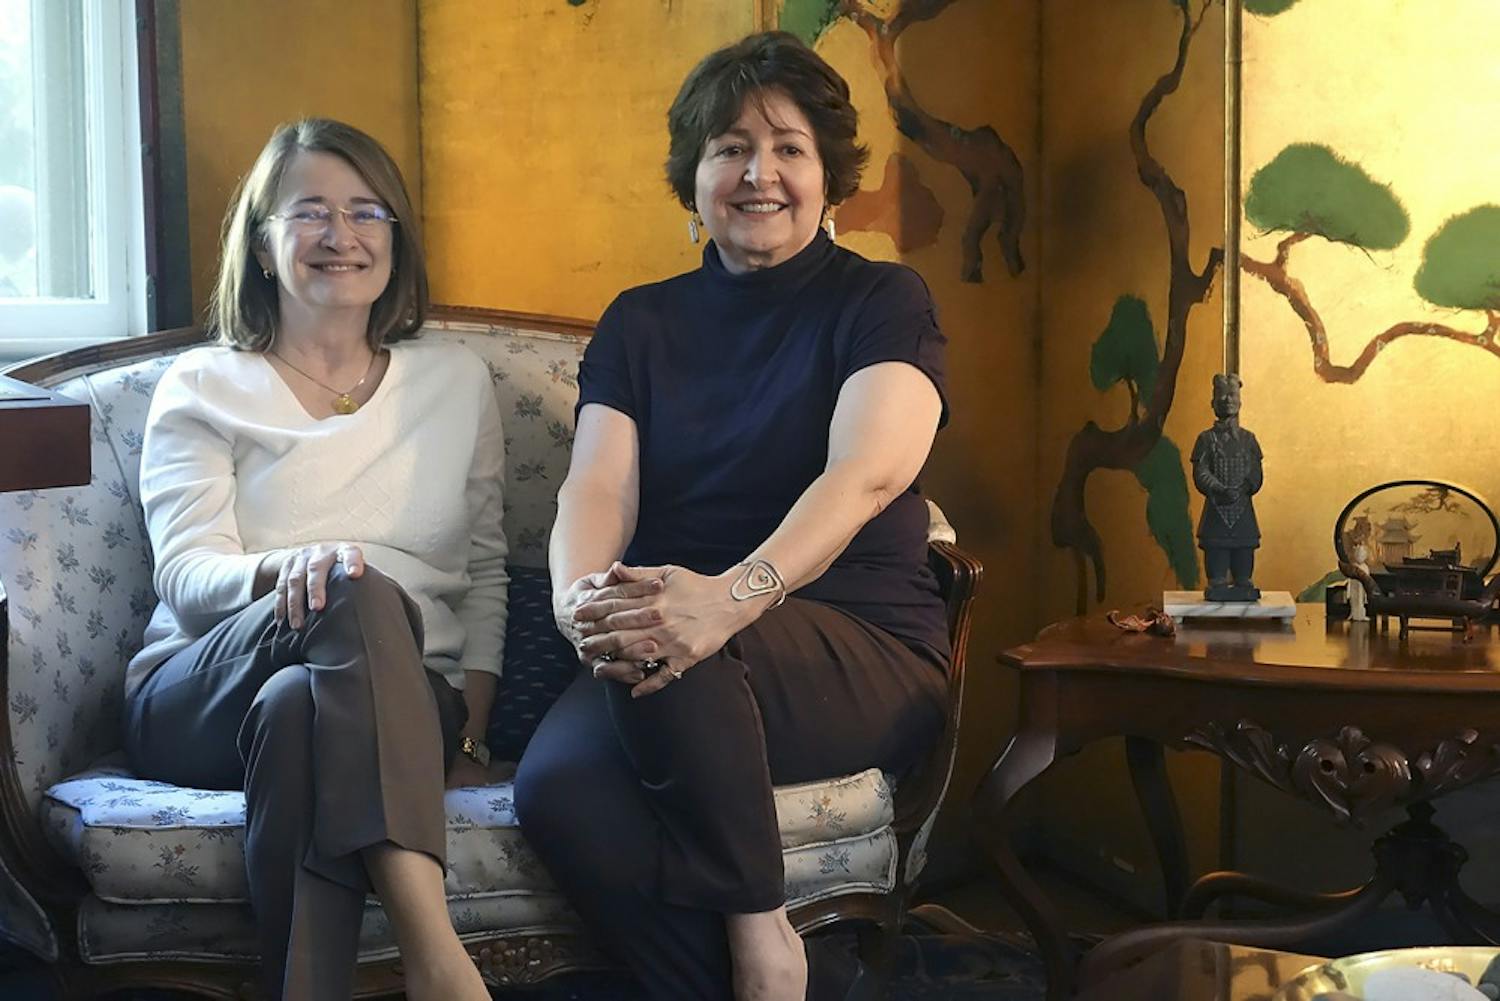 Sisters Marjorie Spruill (left) and Carol Spruill attended UNC during the early 1970s, becoming campus reformers as vocal feminists and anti-Vietnam War activists. Marjorie Spruill recently returned home to North Carolina, visiting her sister in Raleigh for a weekend.  				